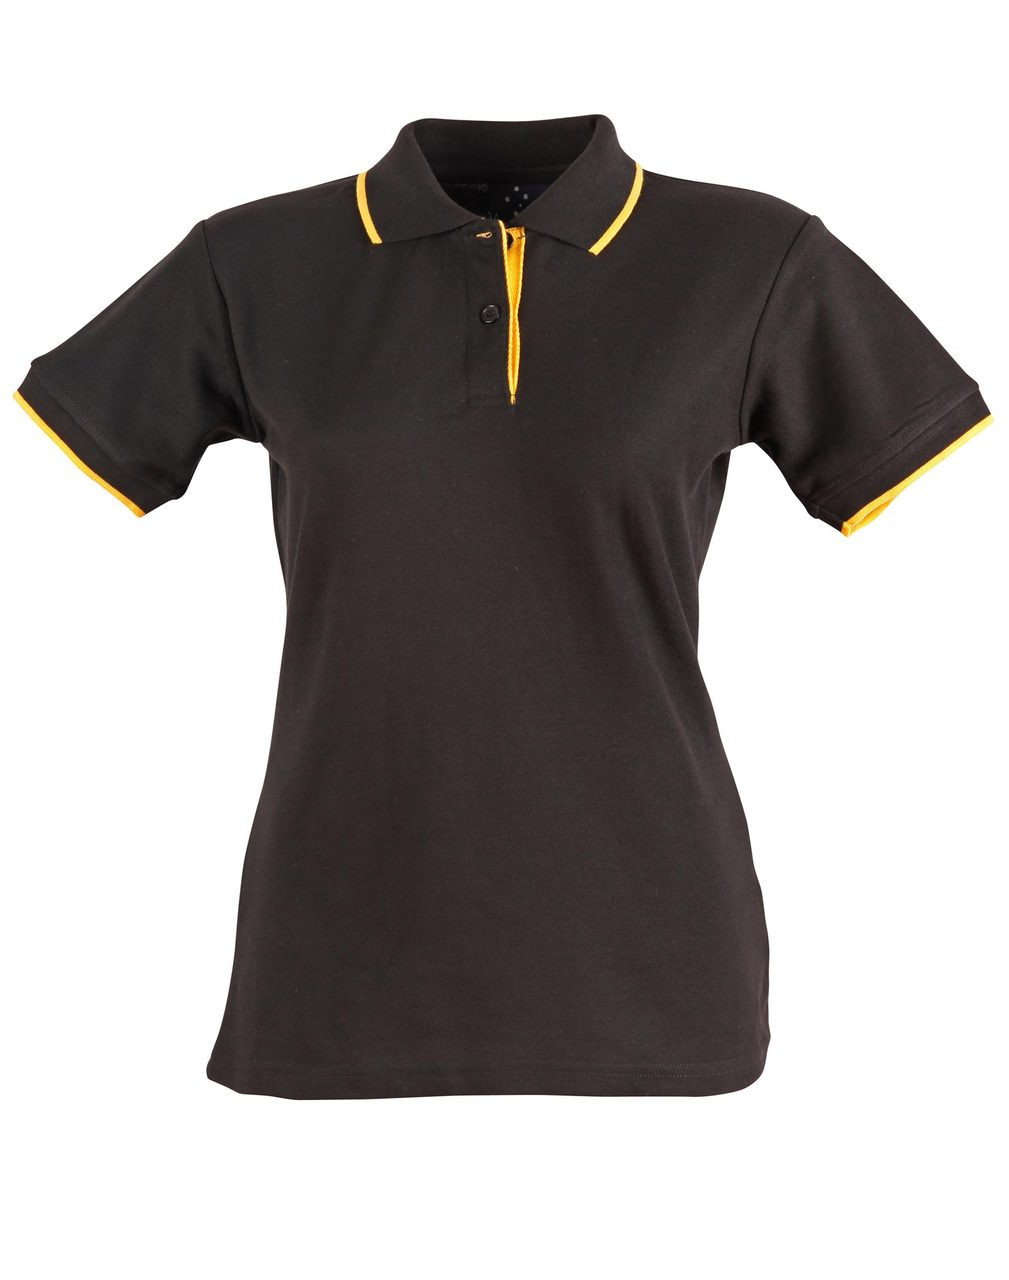 polo shirt black and gold